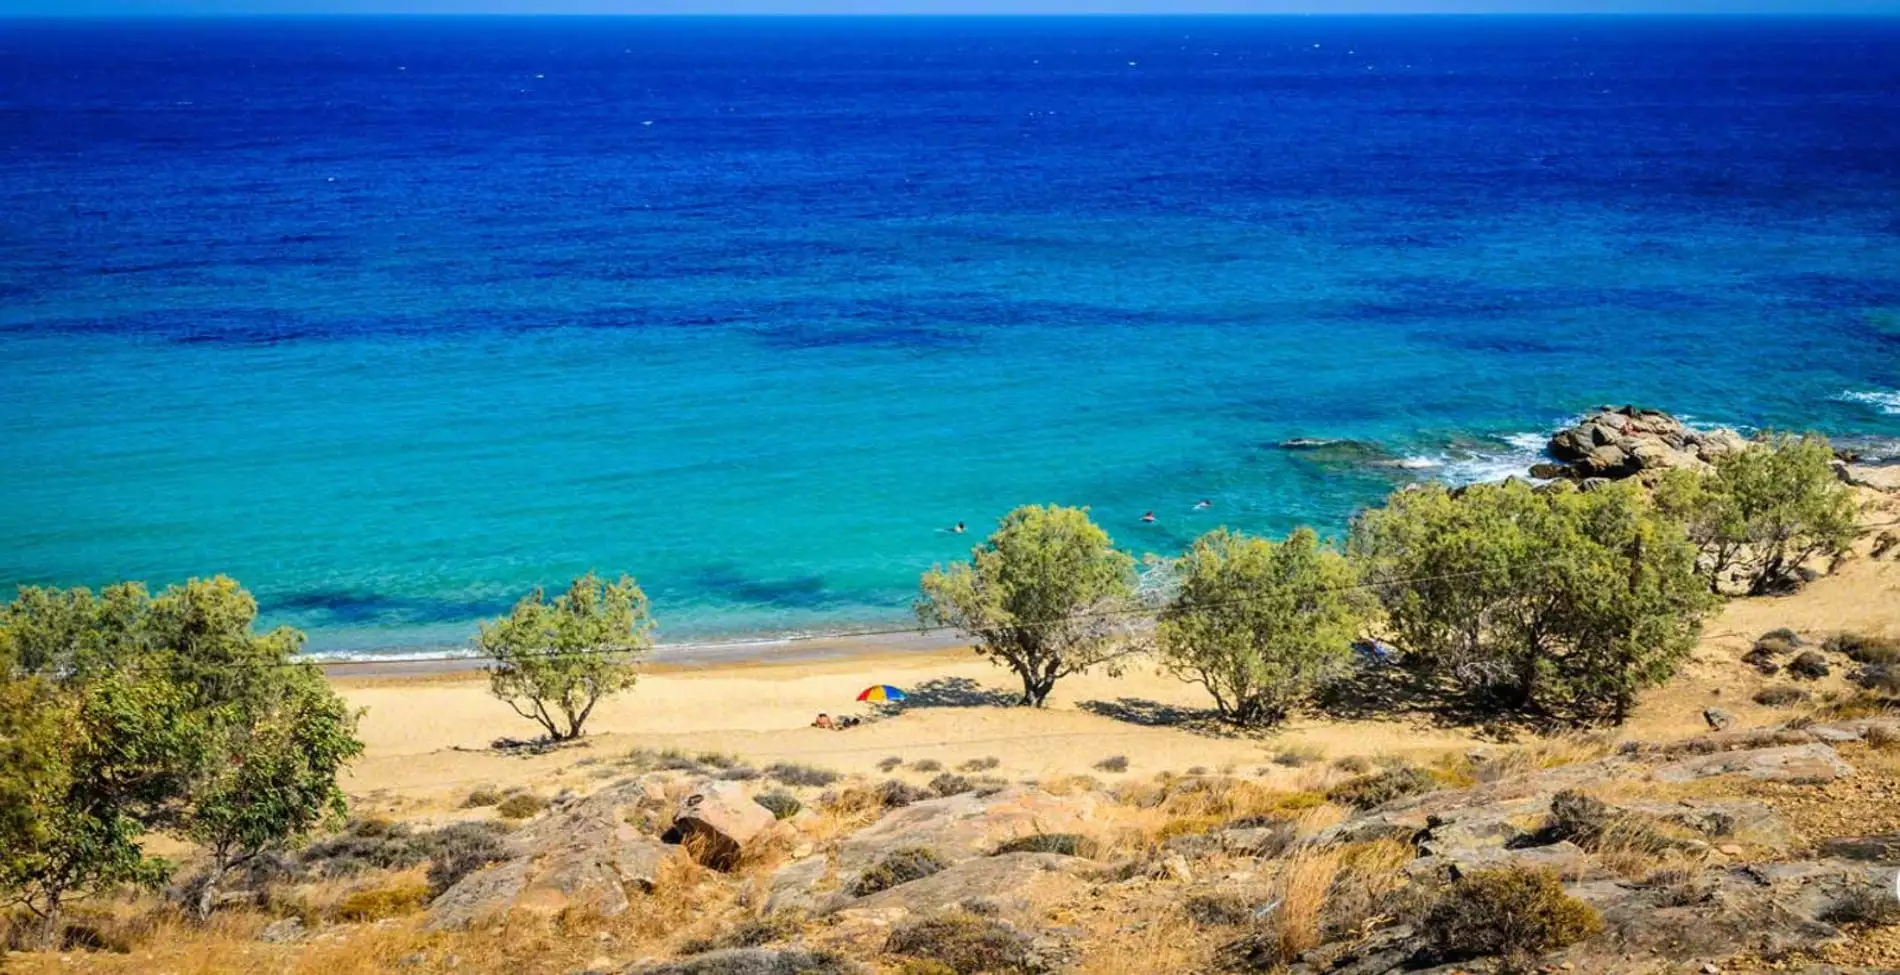 The Greek island with the 72 beaches without sunbeds